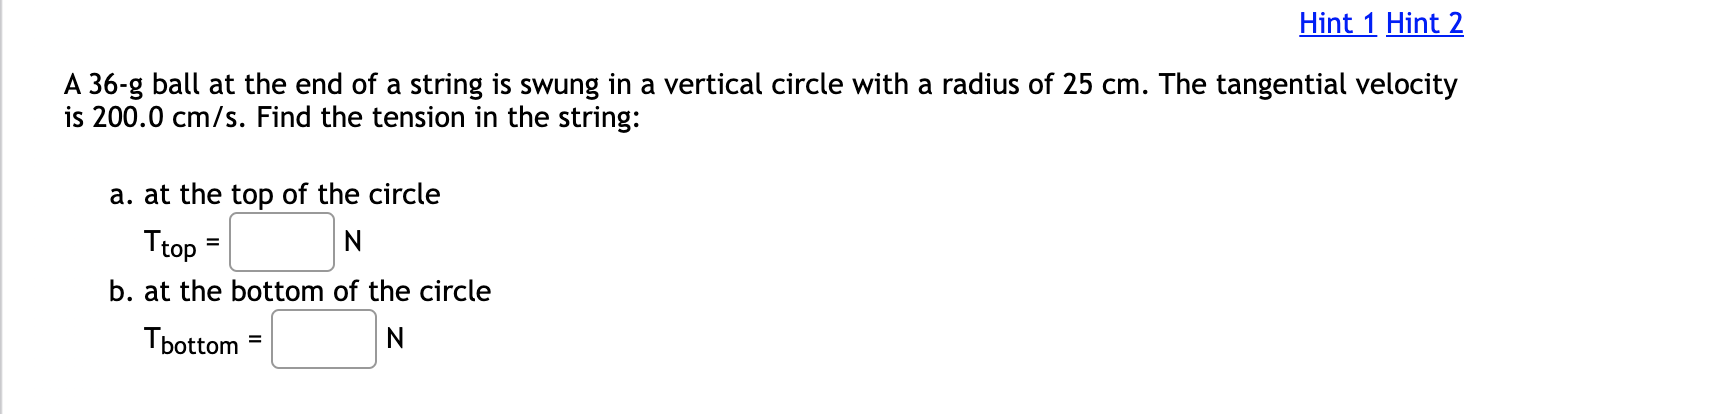 A 36 G Ball At The End Of A String Is Swung In A Vertical Circle With A Radius Of 25 Cm The Tangential Velocity Is 200 1